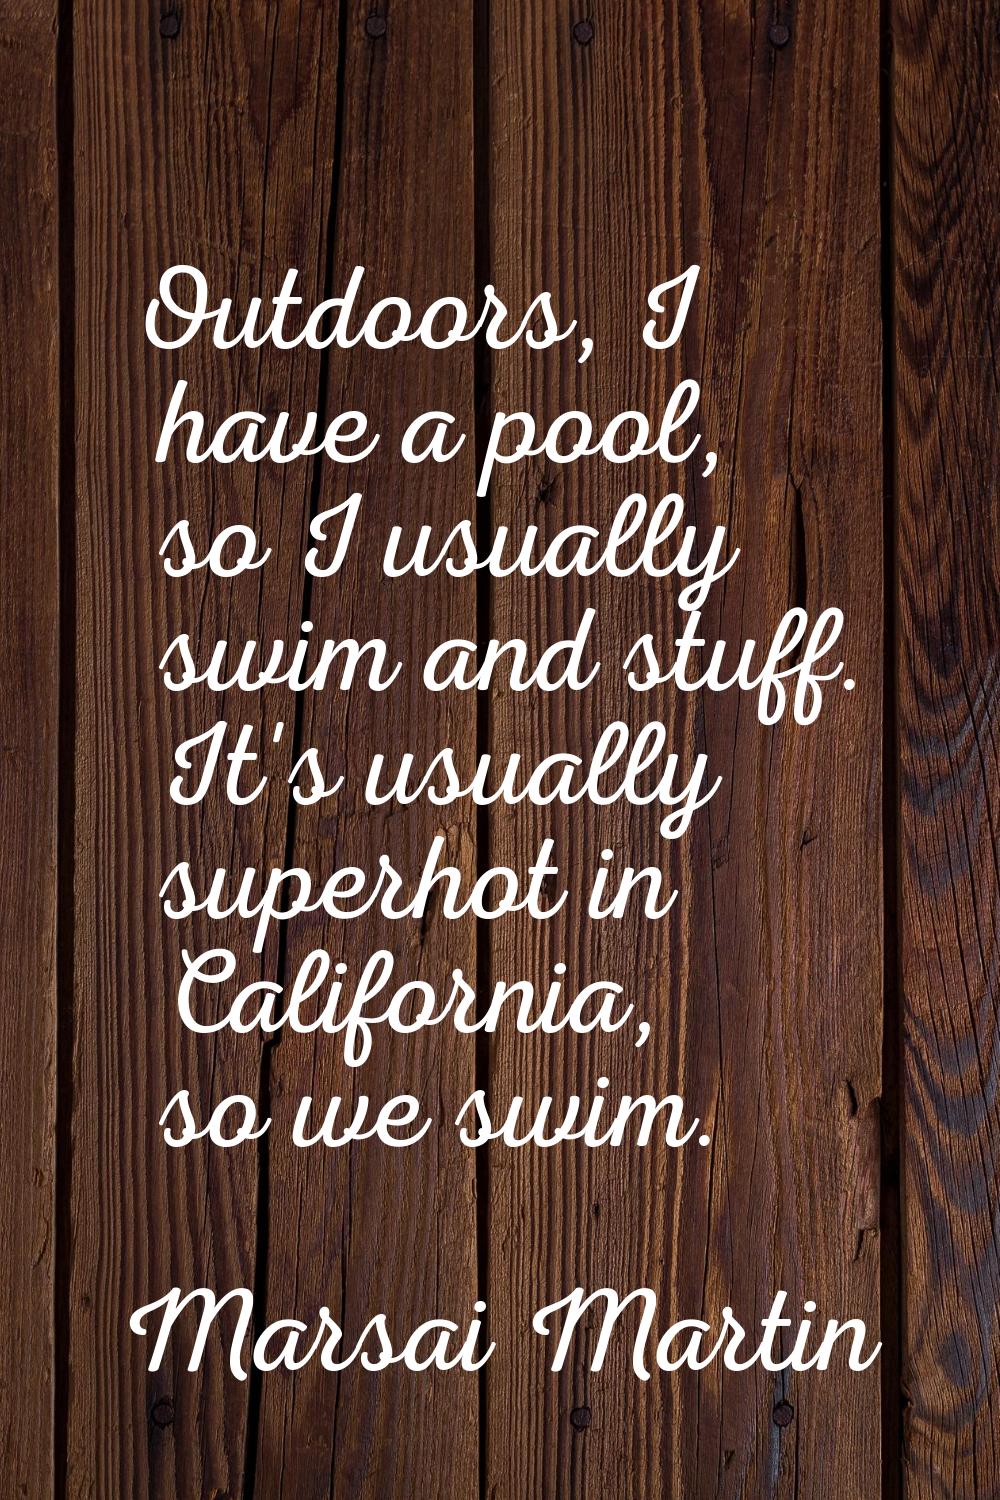 Outdoors, I have a pool, so I usually swim and stuff. It's usually superhot in California, so we sw